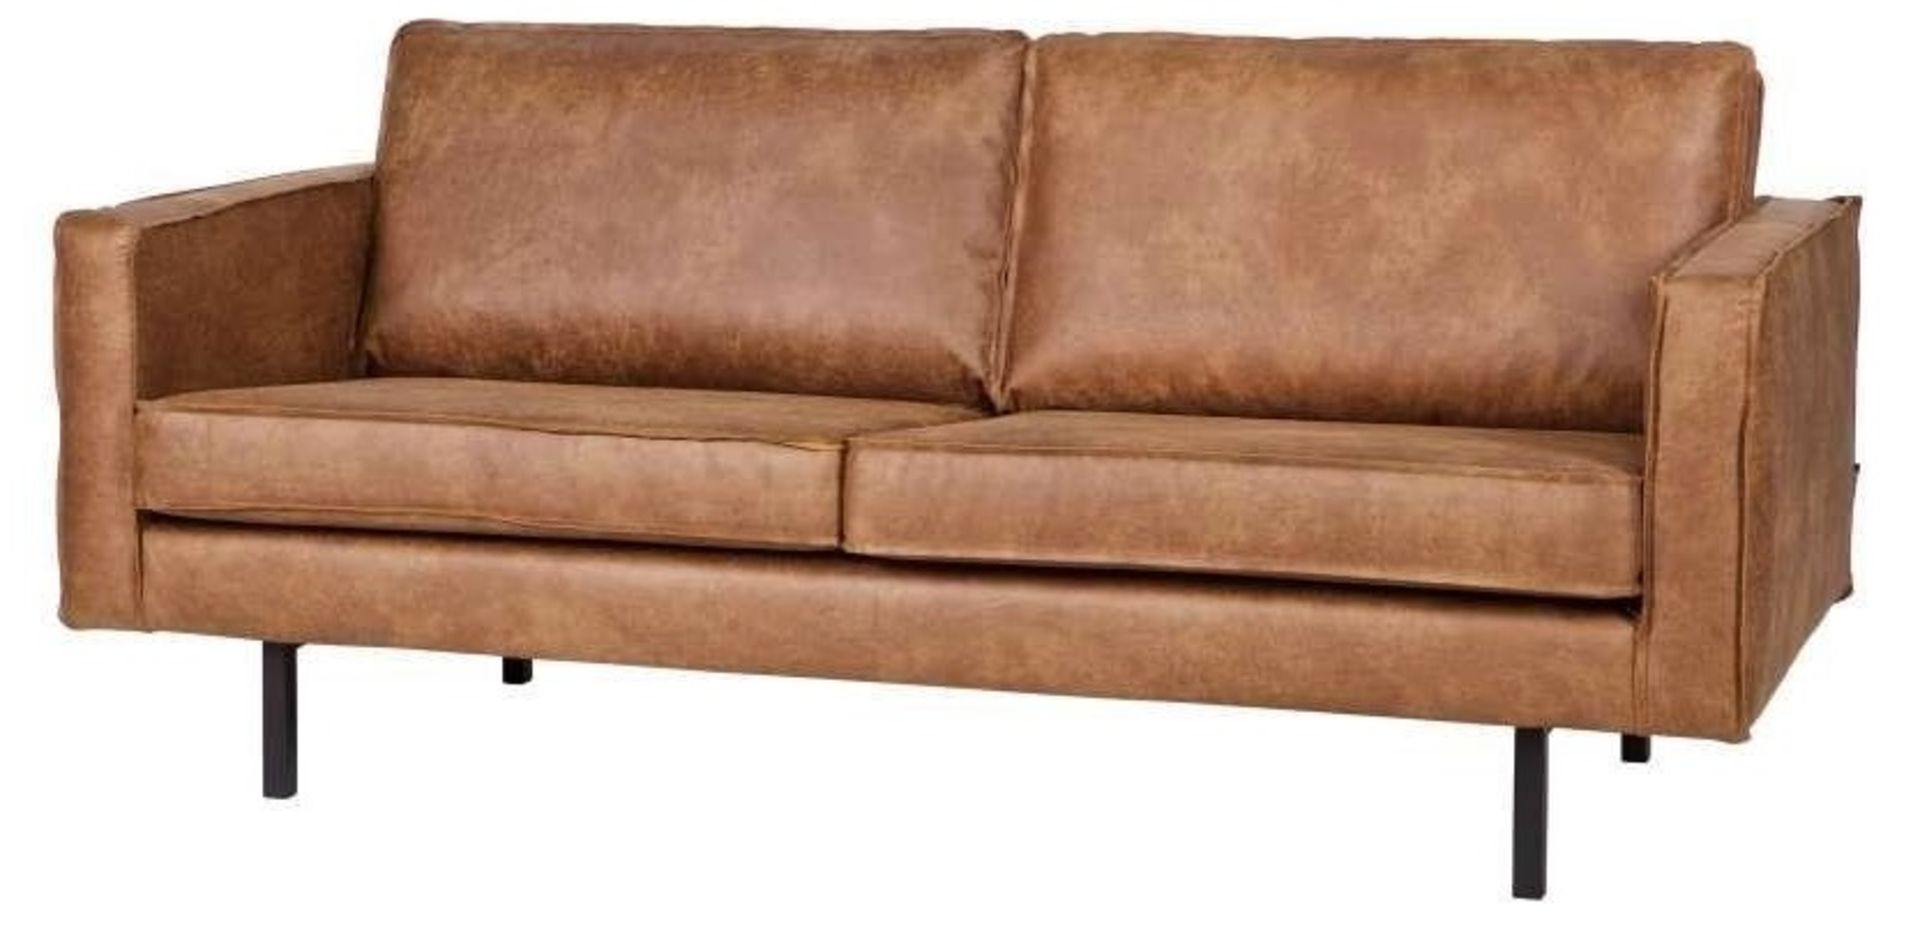 1 x 'Rodeo' Contemporary 2-Seater Leather Sofa In Cognac Brown - Dimensions: H85xW190xH86cm - Image 4 of 4